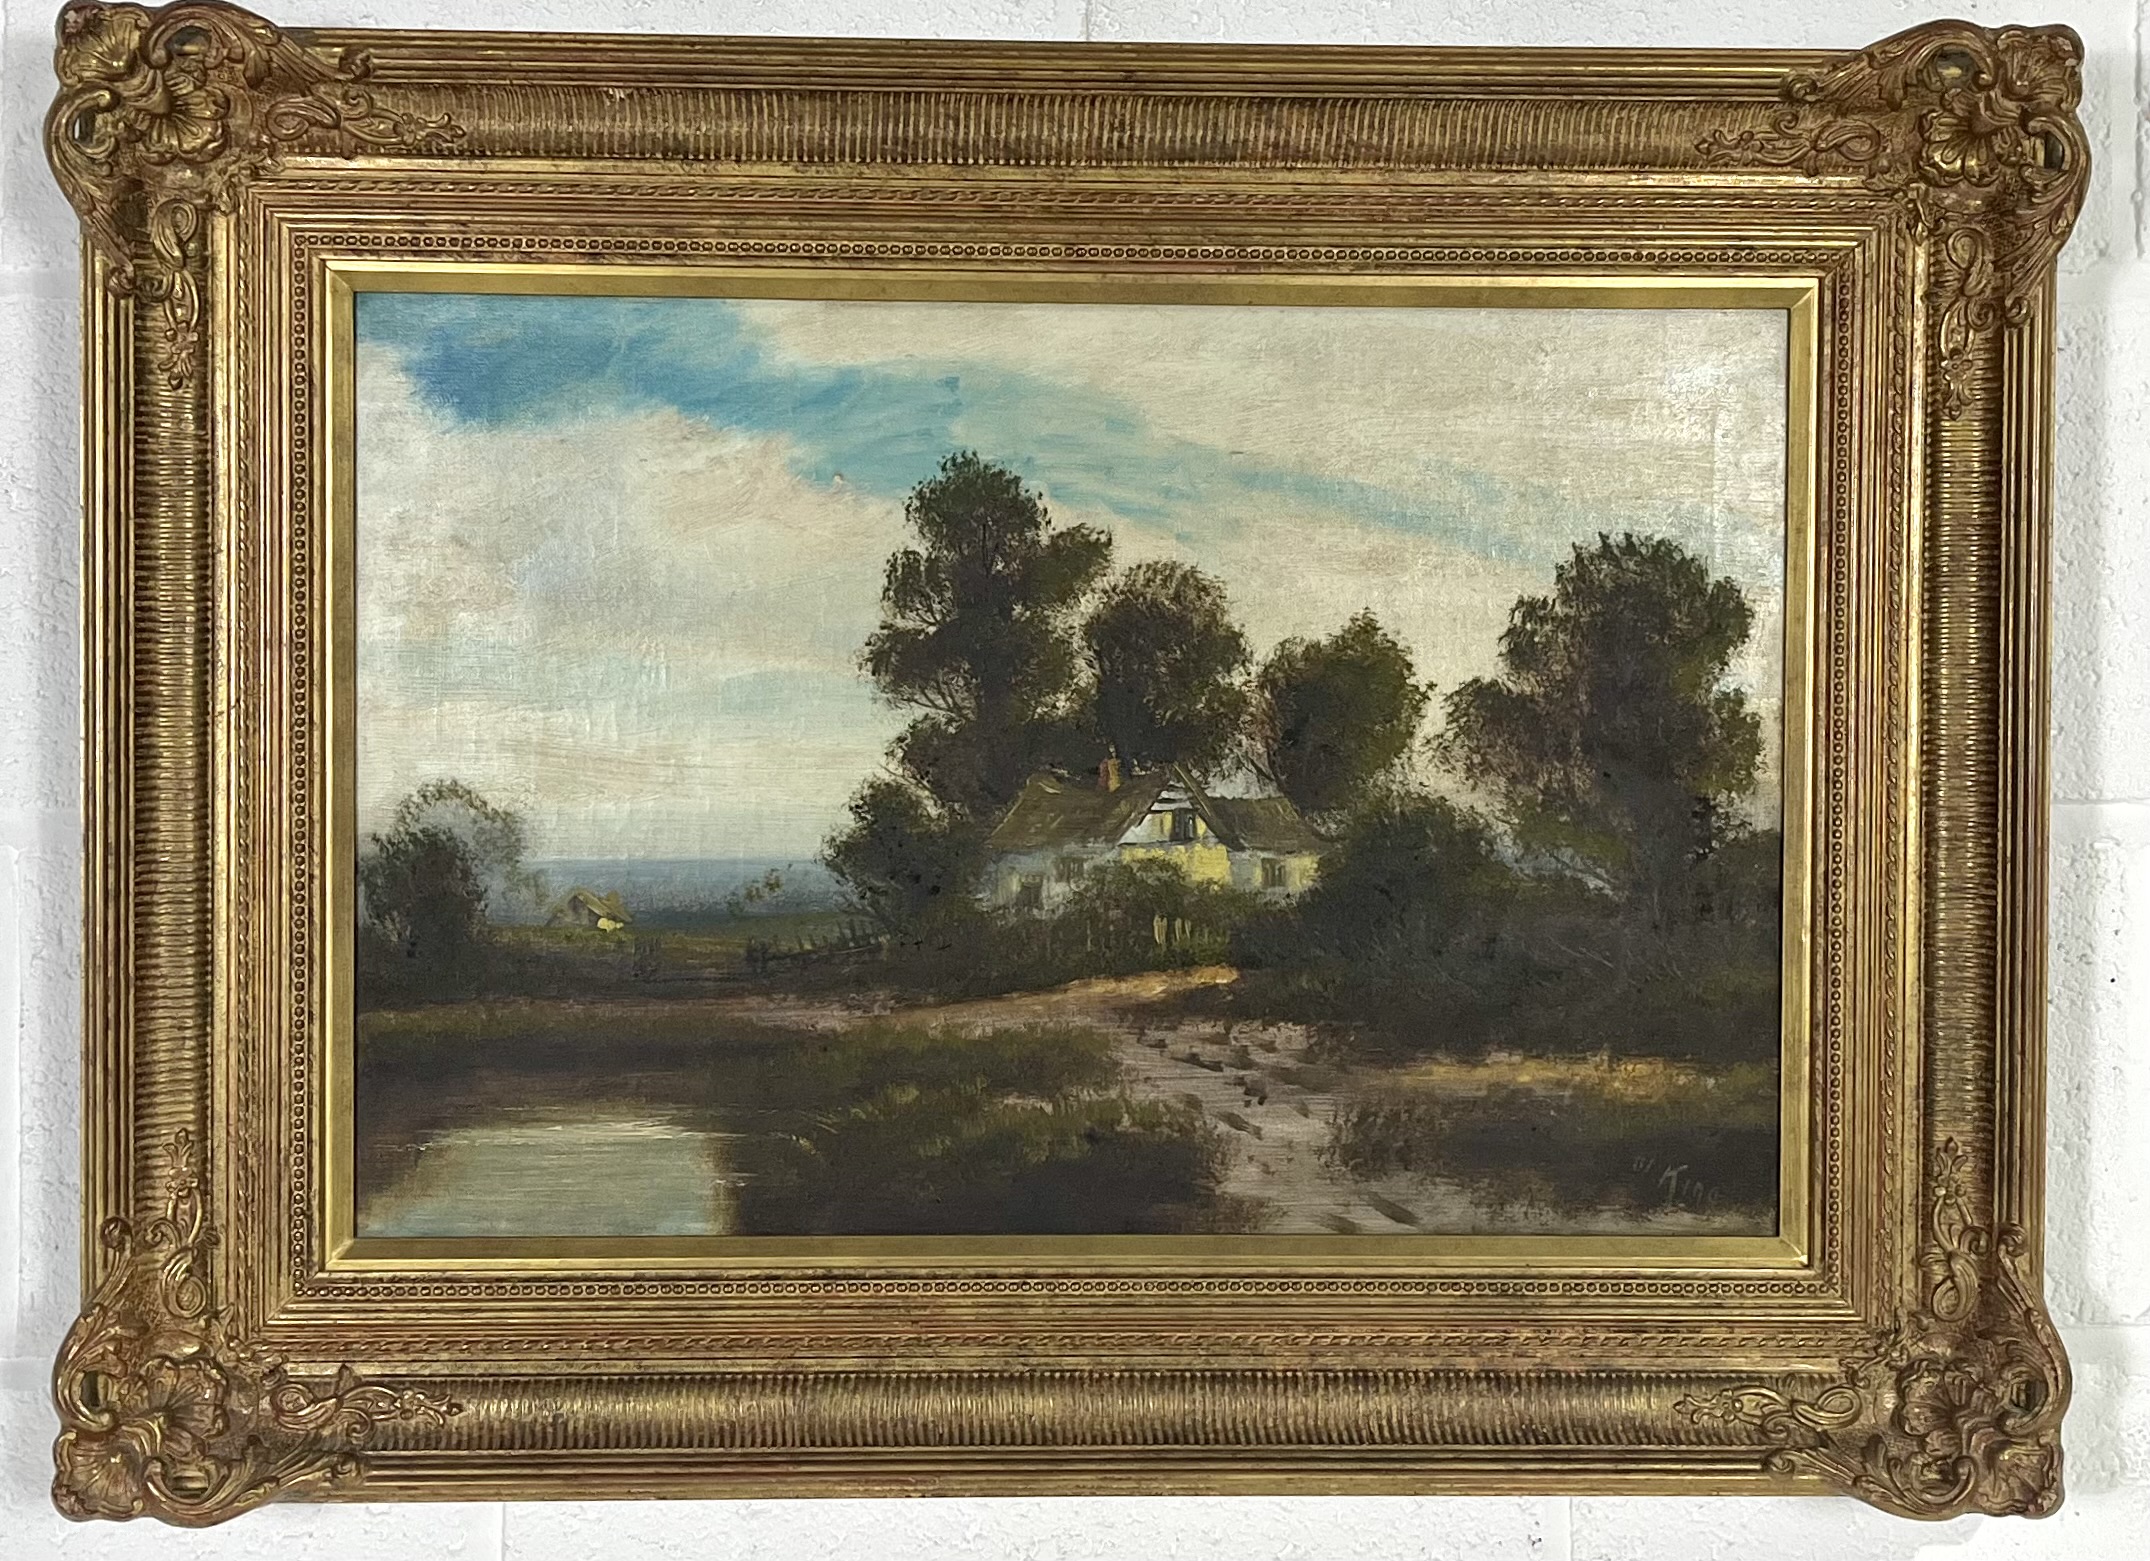 An oil on canvas painting of a river scene in an ornate gilt frame, signed W. King, overall size